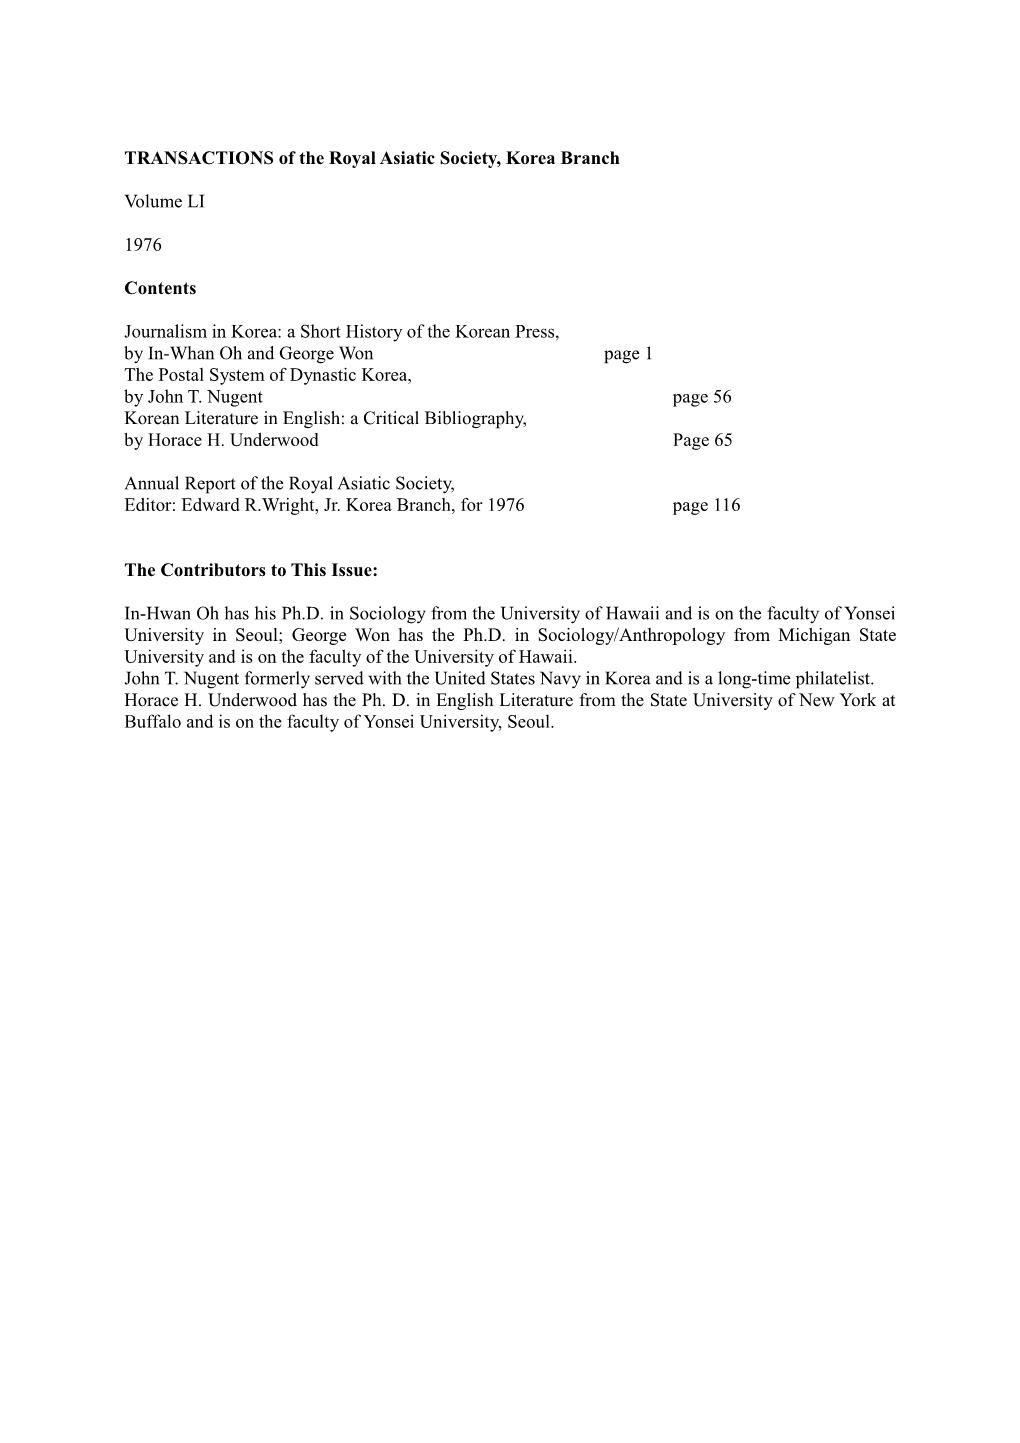 TRANSACTIONS of the Royal Asiatic Society, Korea Branch s1